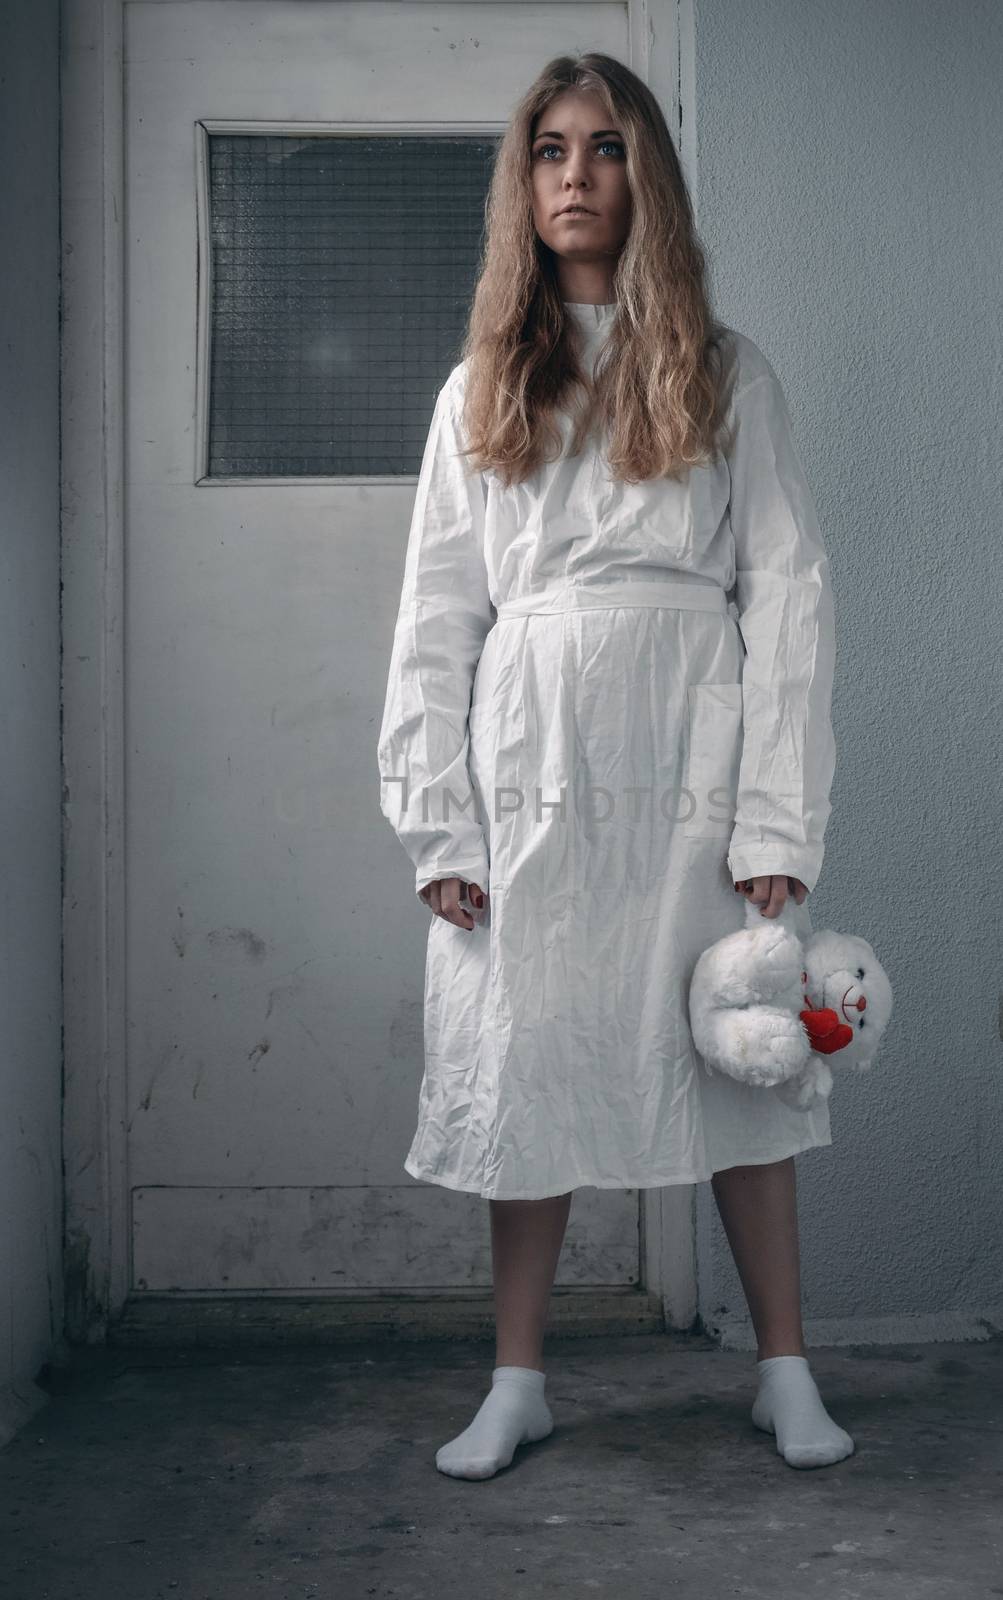 mentally ill girl with straitjacket in a Psychiatric by natali_brill